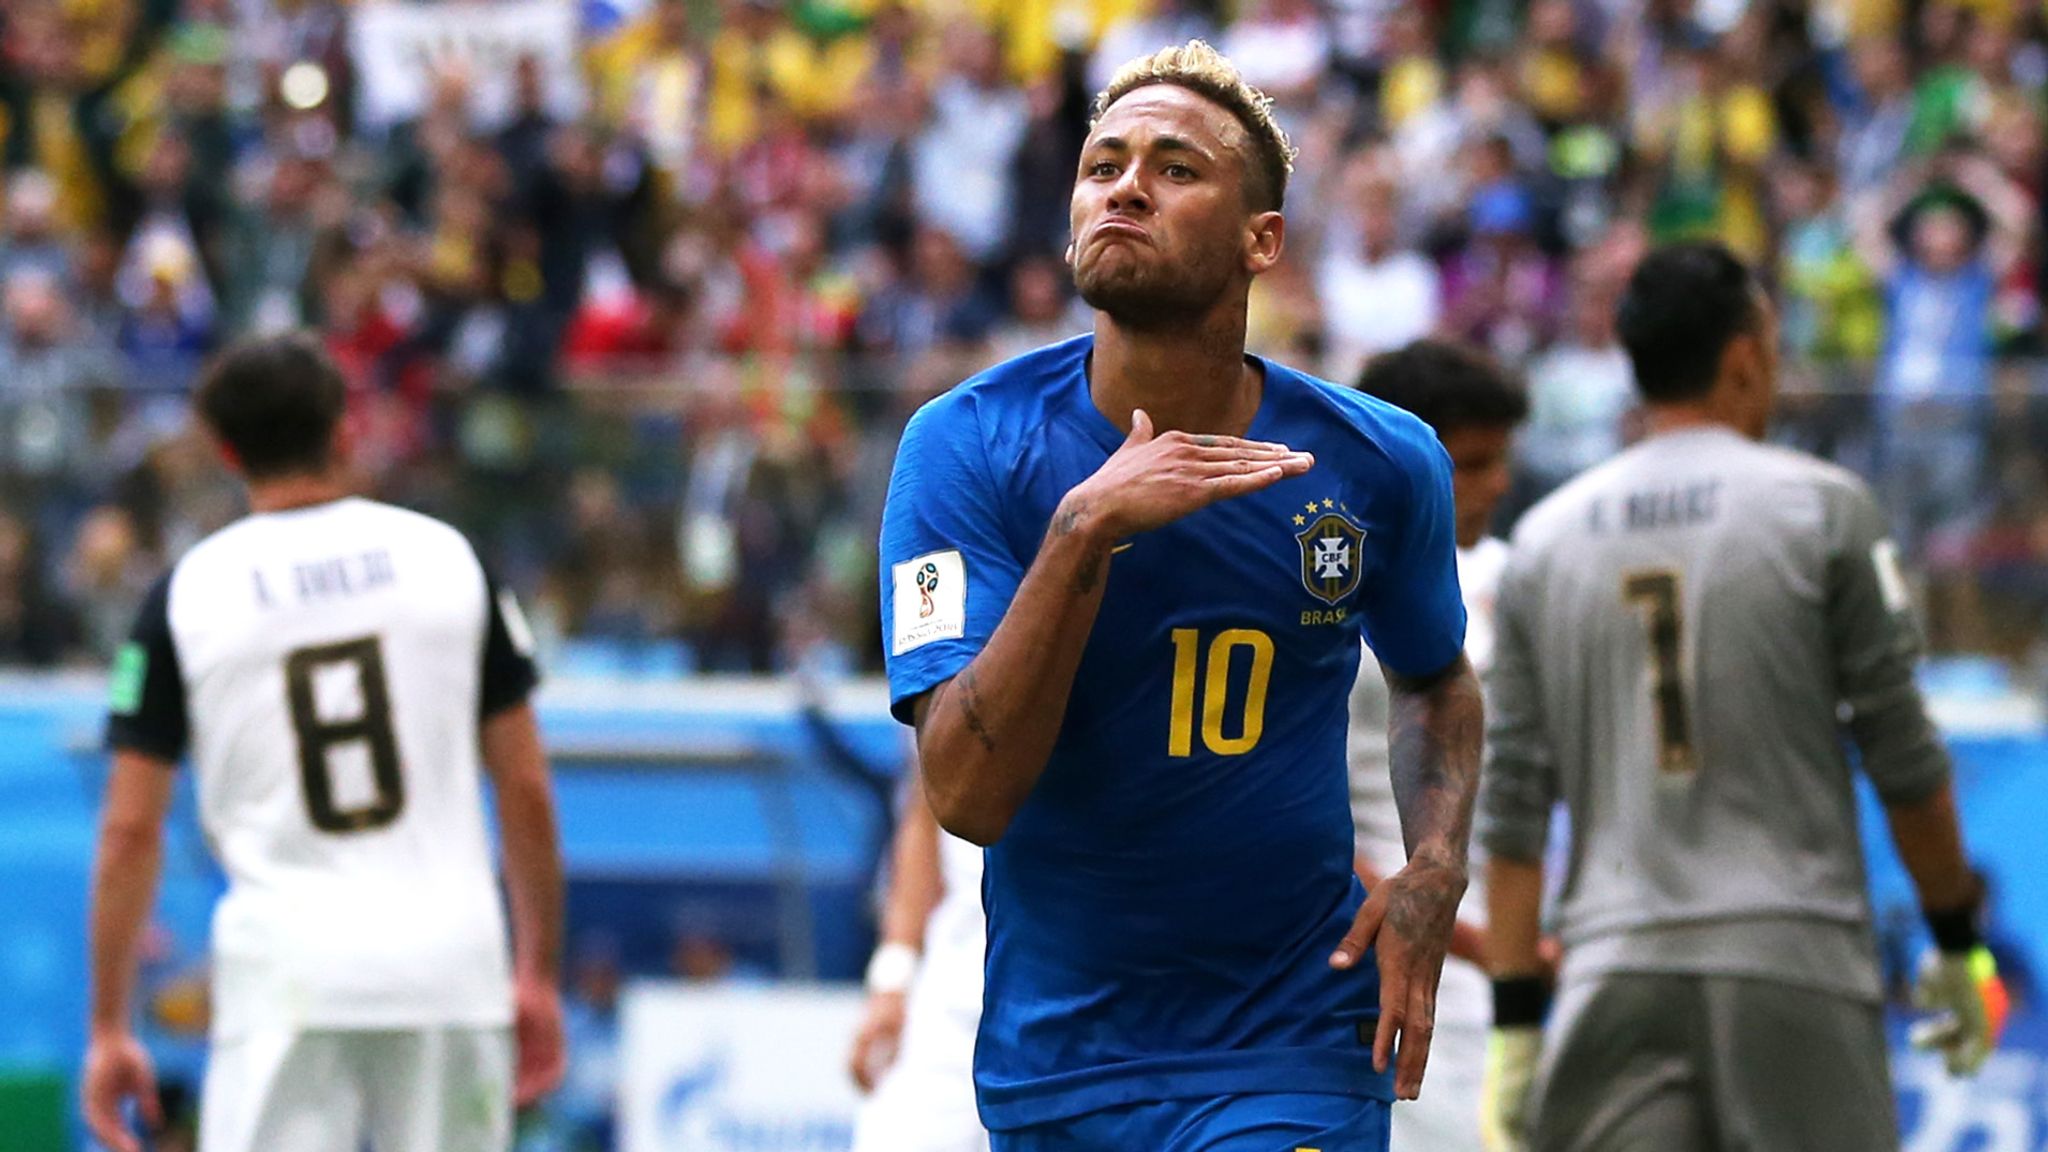 Five most stylish World Cup soccer stars: Neymar and…